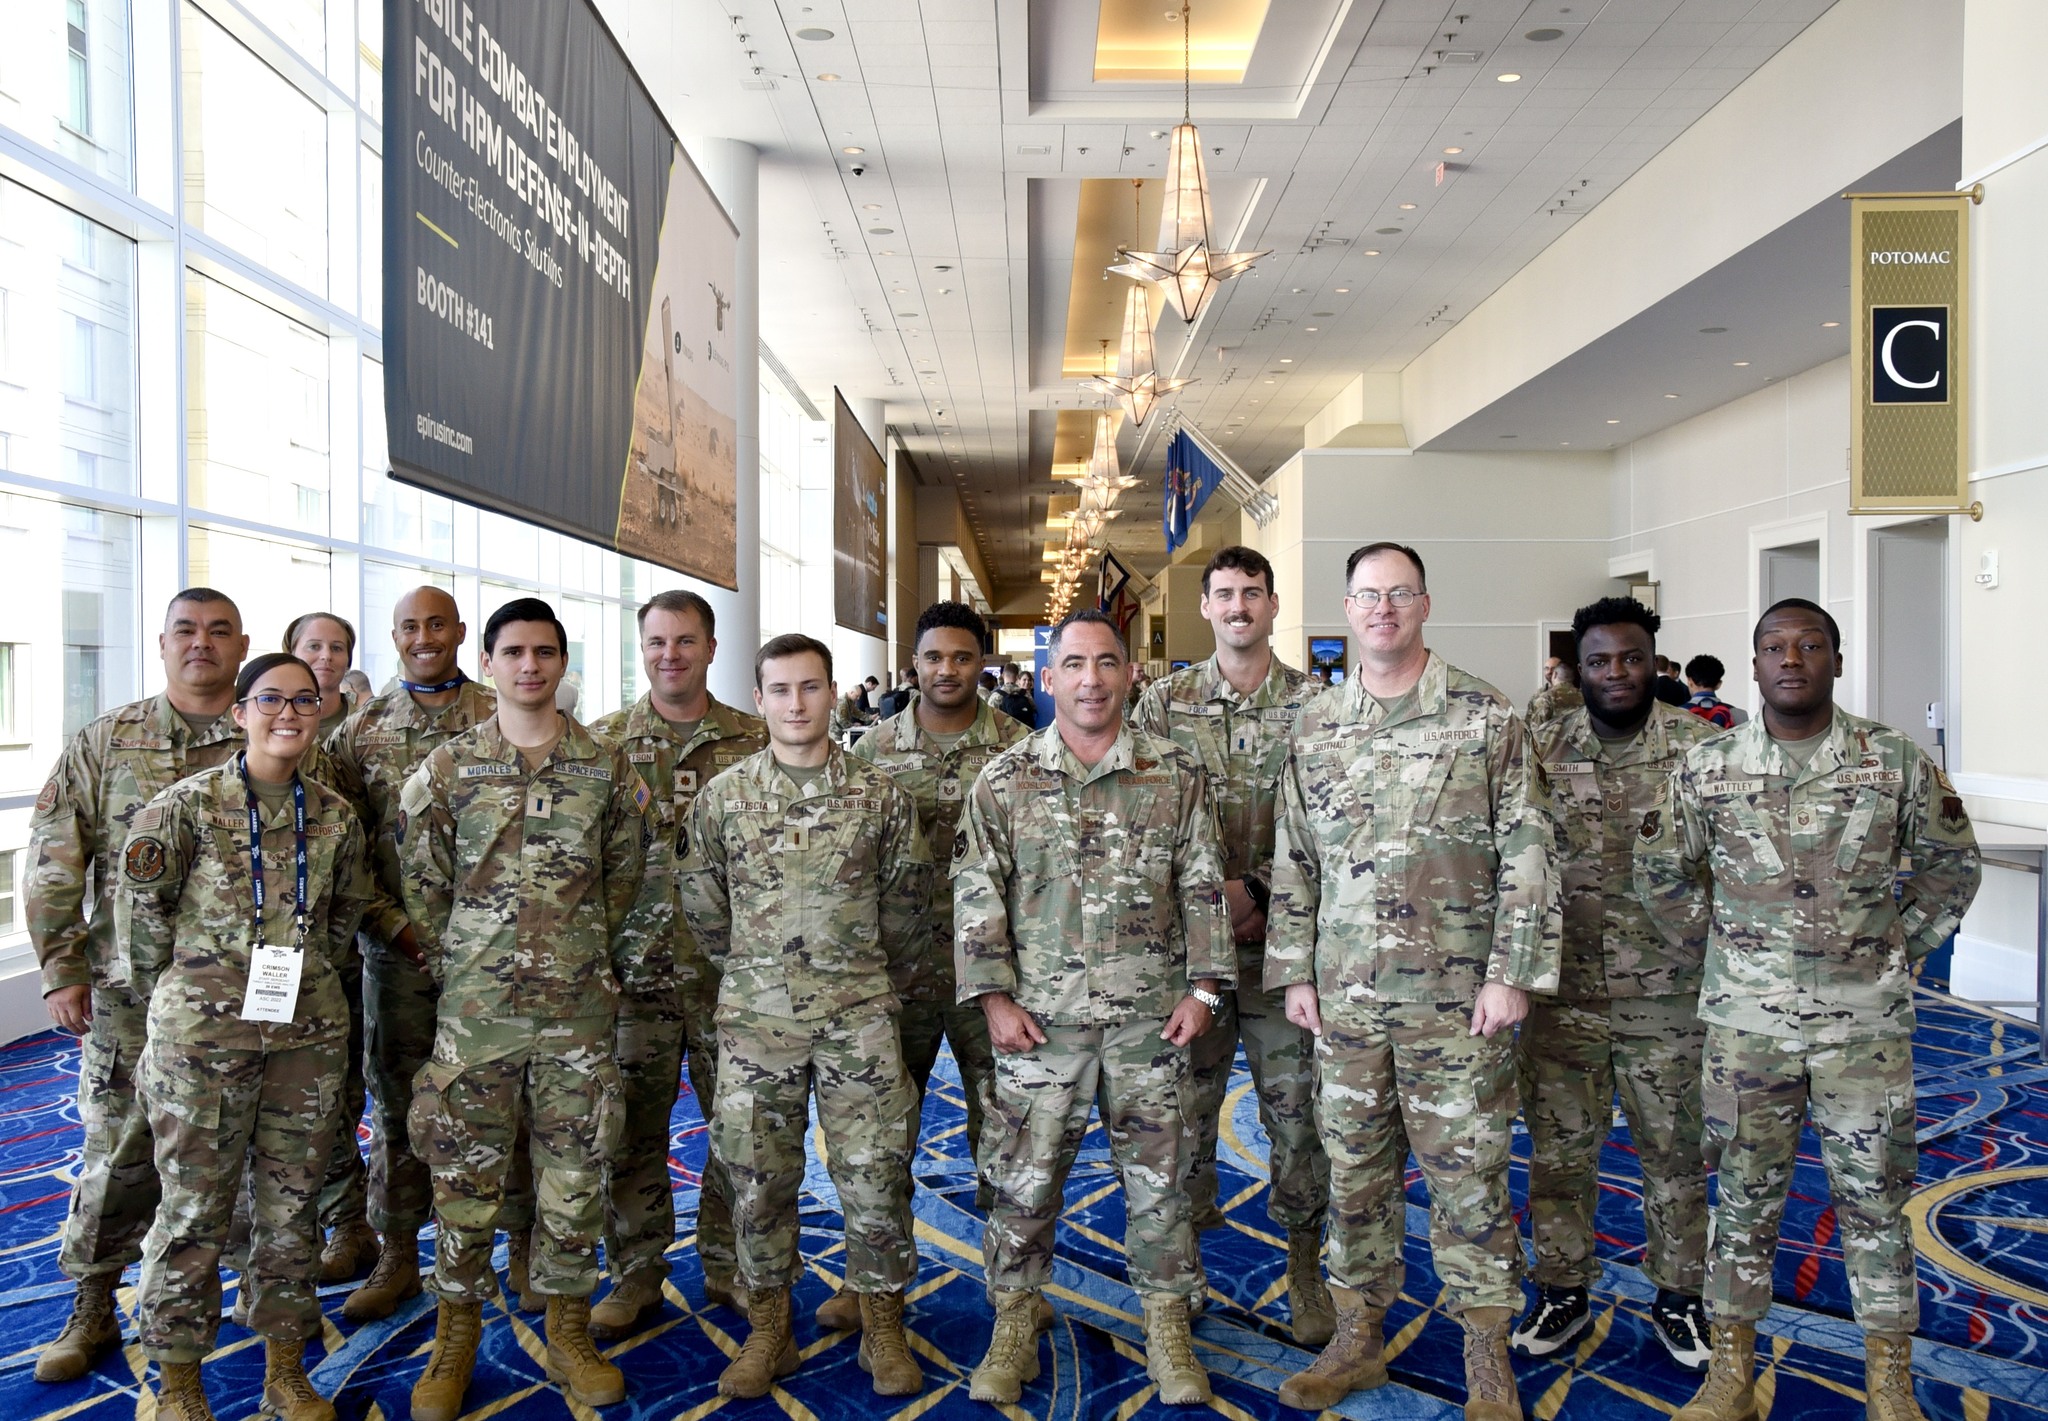 Members from the 350th Spectrum Warfare Wing at this year's Air Force Association&nbsp;Air, Space, and Cyber Conference in Washington, D.C. Col. Koslov can be seen front and center.<em> Credit: 350th SWW</em>